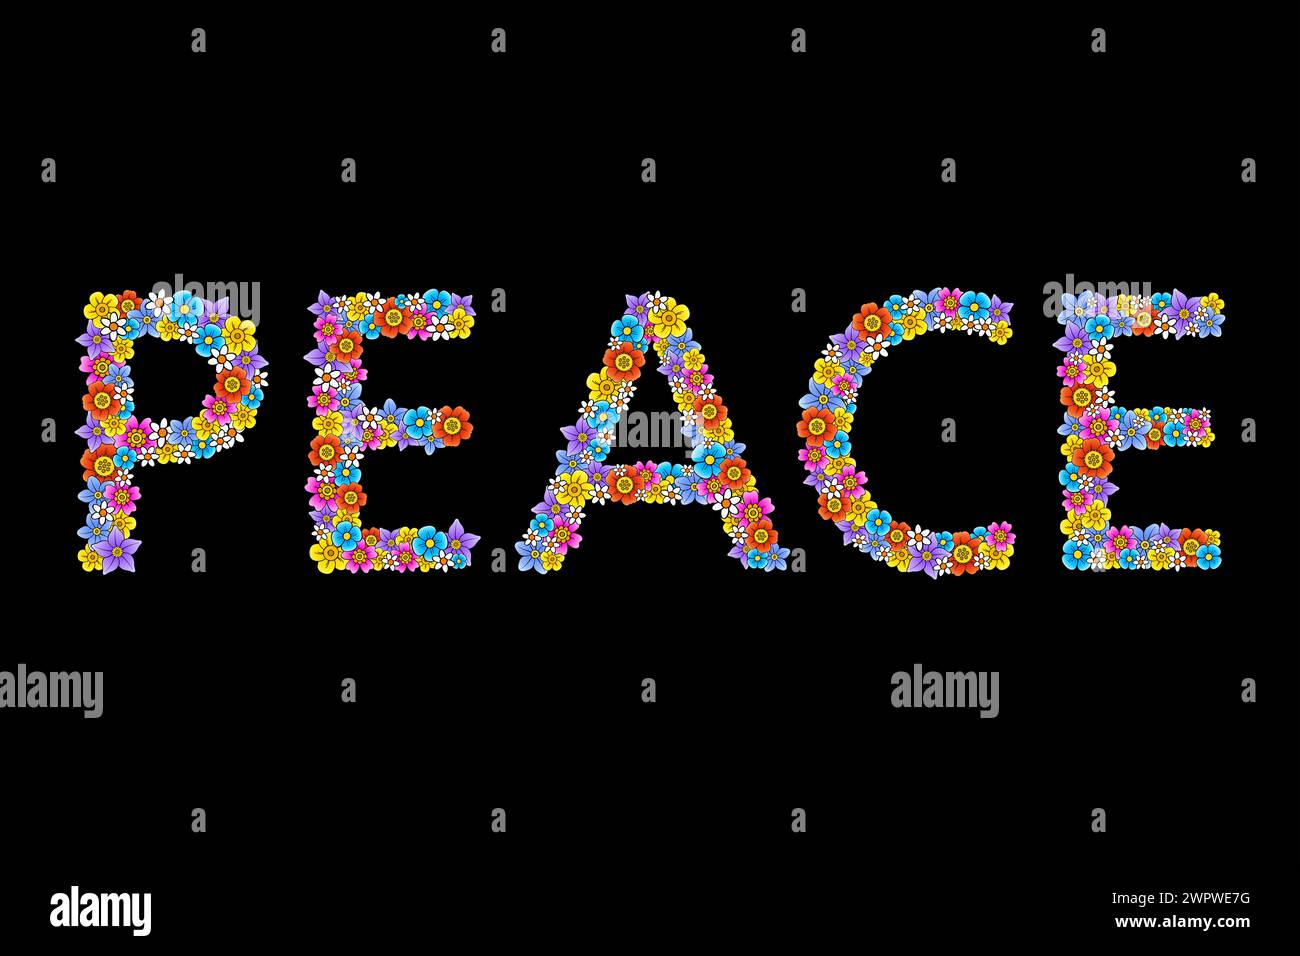 PEACE lettering, made of colorful fantasy flowers. Numerous vibrant blossoms are randomly arranged, to form the english word PEACE. Anti-war symbol. Stock Photo